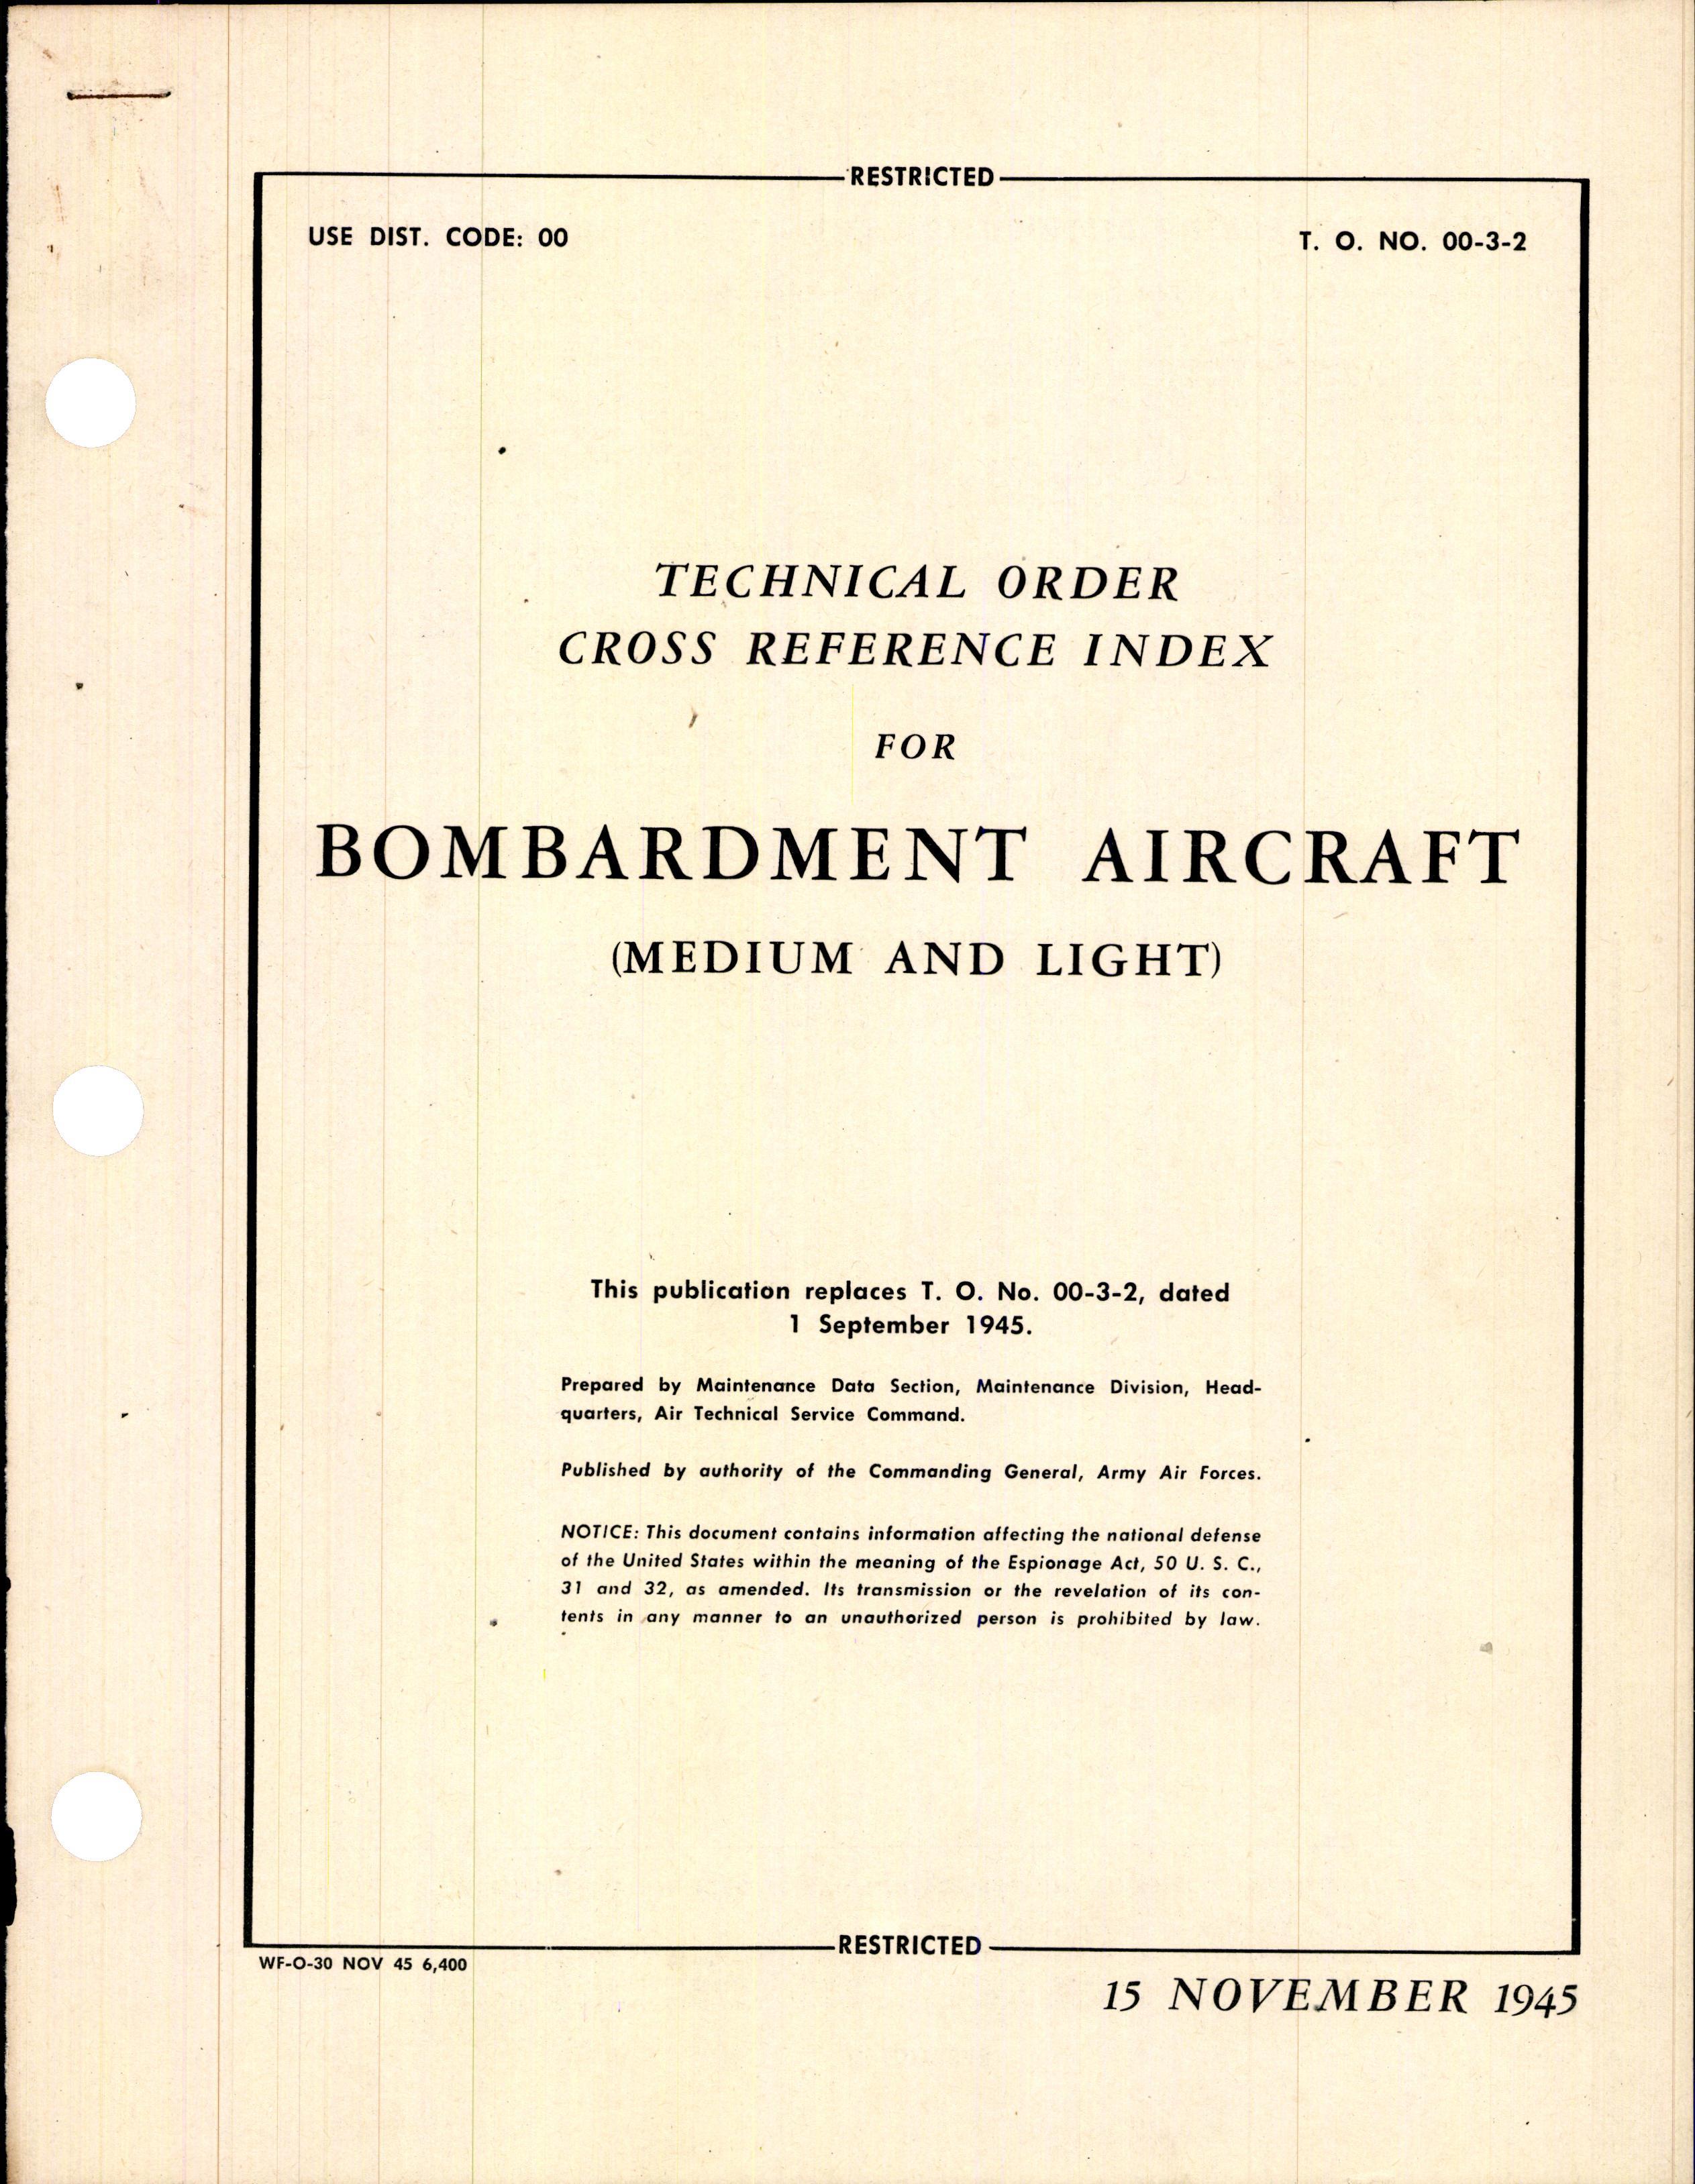 Sample page 1 from AirCorps Library document: Index for Bombardment Aircraft (Medium and Light)